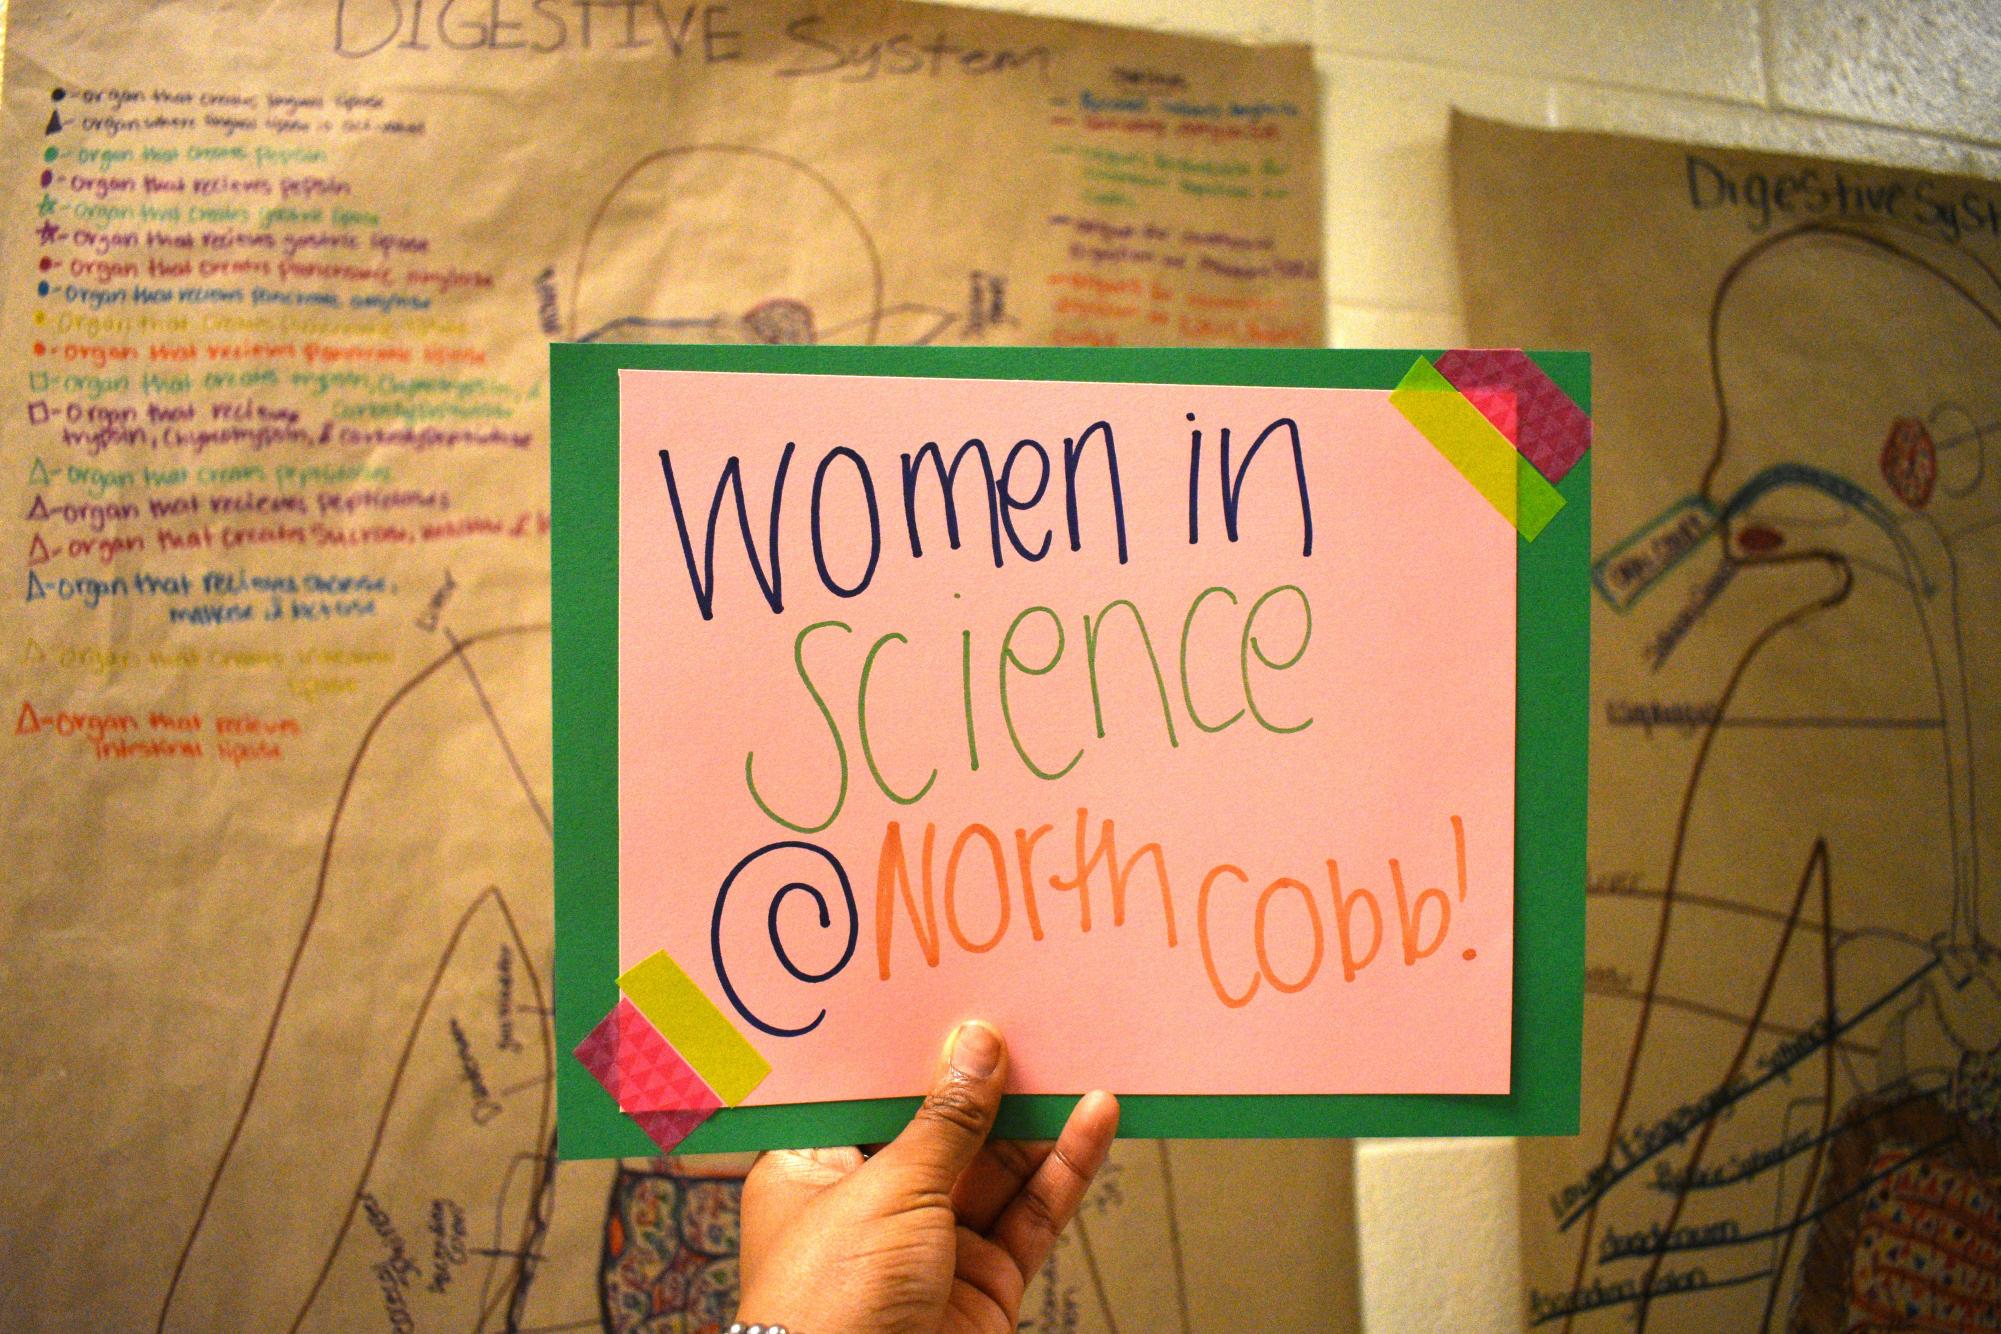 Although NC holds a reputation for its appropriately renowned International Studies Magnet Program, it equally deserves praise for its successful encouragement of the field of science, predominantly through the women and girls that engender that passion. Both in and out of school, the ladies of NC showcase the cruciality of female voices in science. With club meetings, lesson plans or summer programs, NC women help fan the flame of the importance of female voices in this diverse field. 
